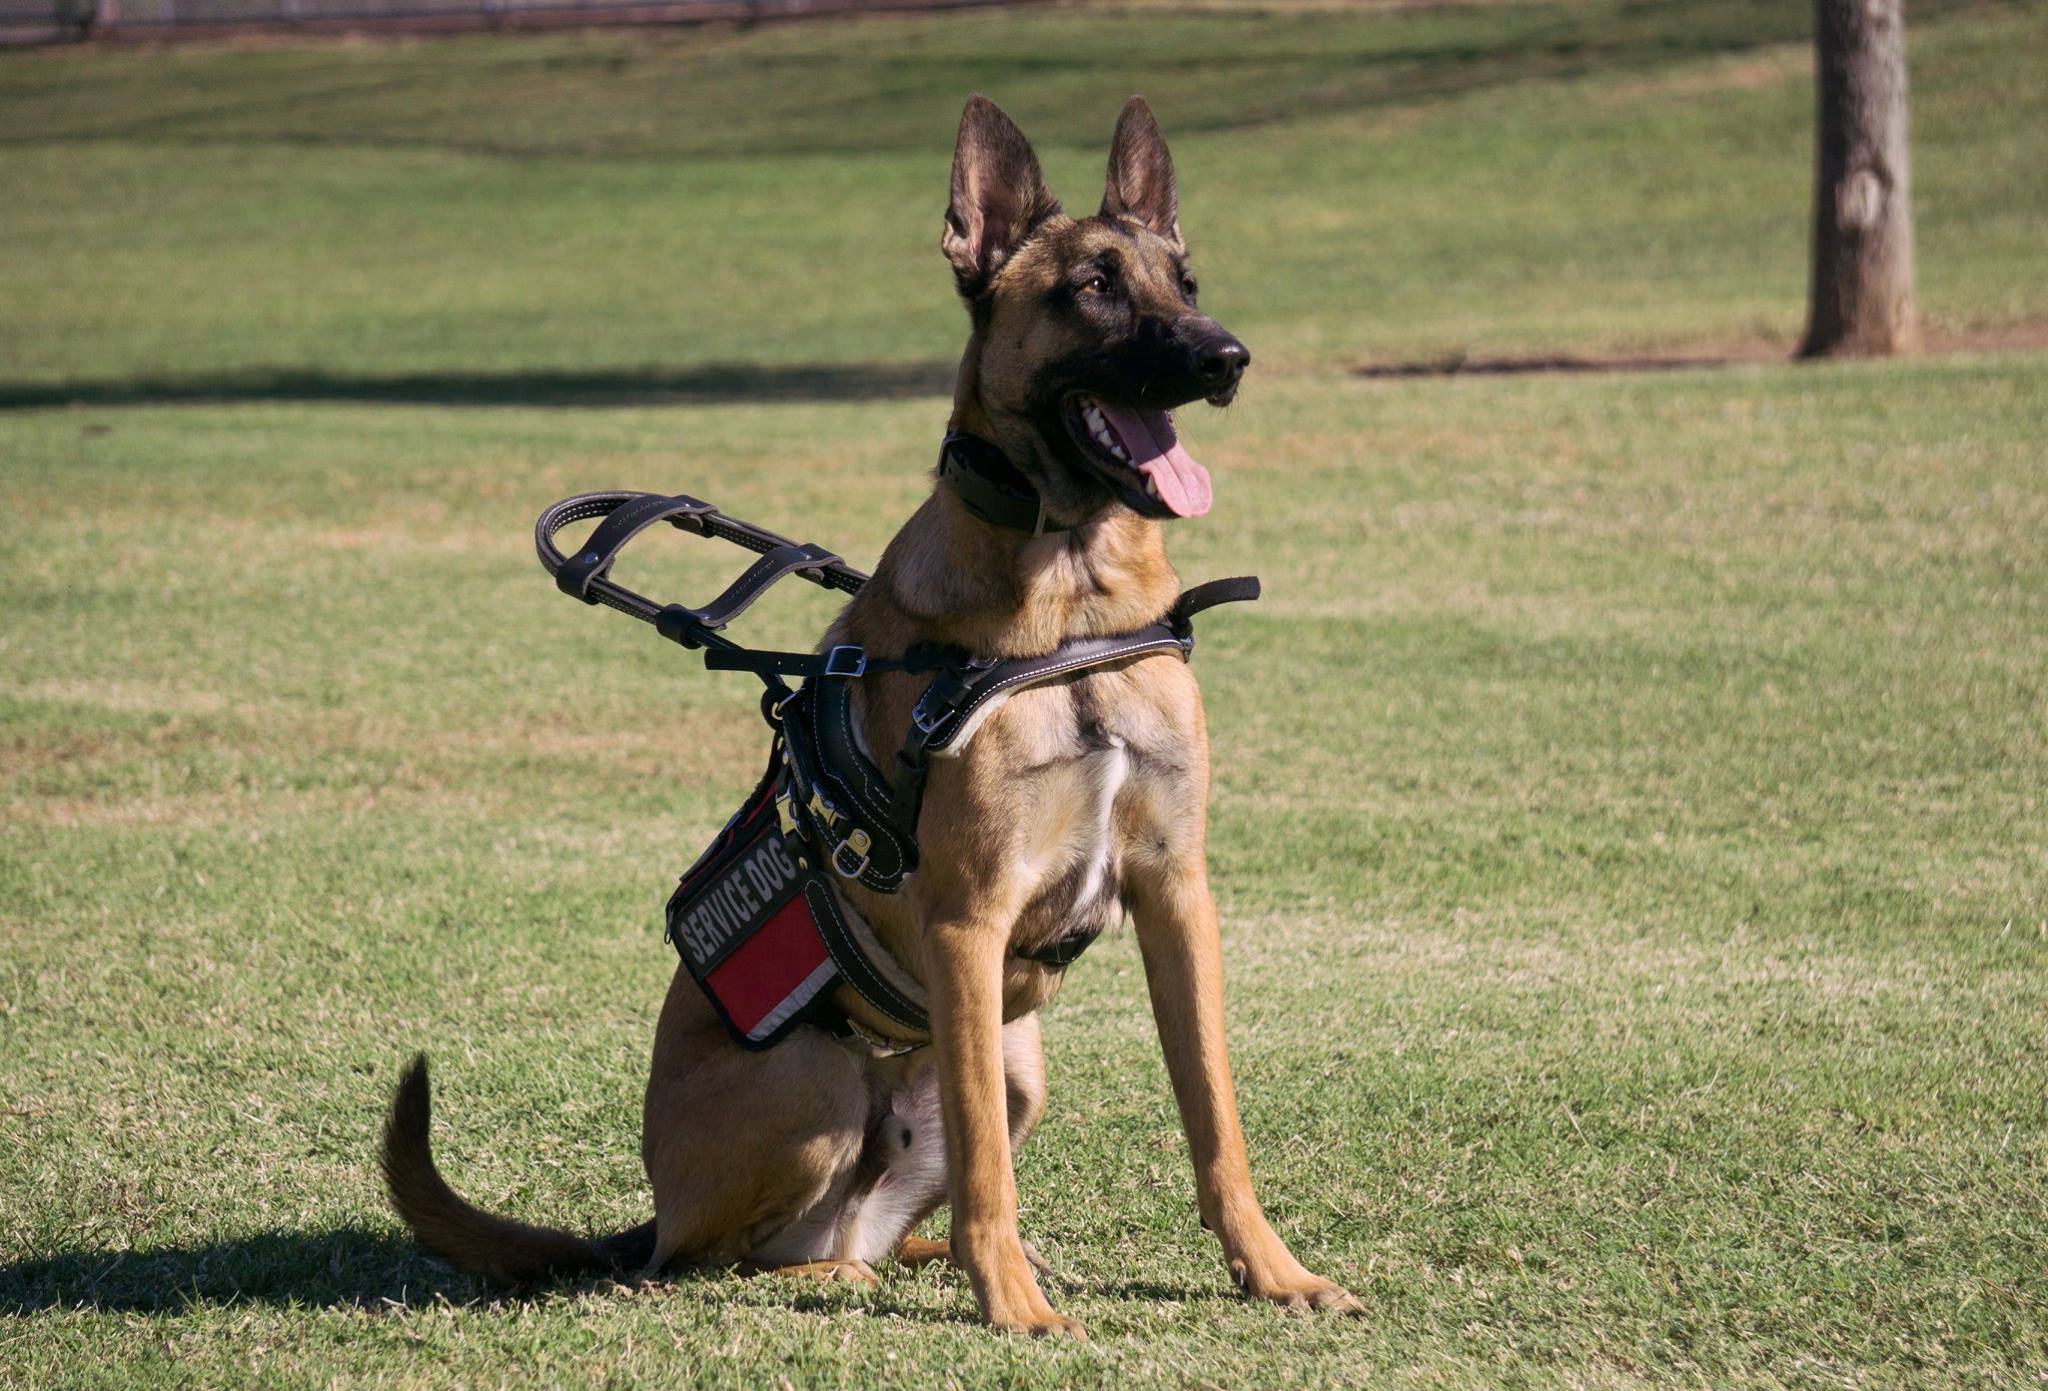 Spending Your Summer with a Service Dog in Colorado Springs